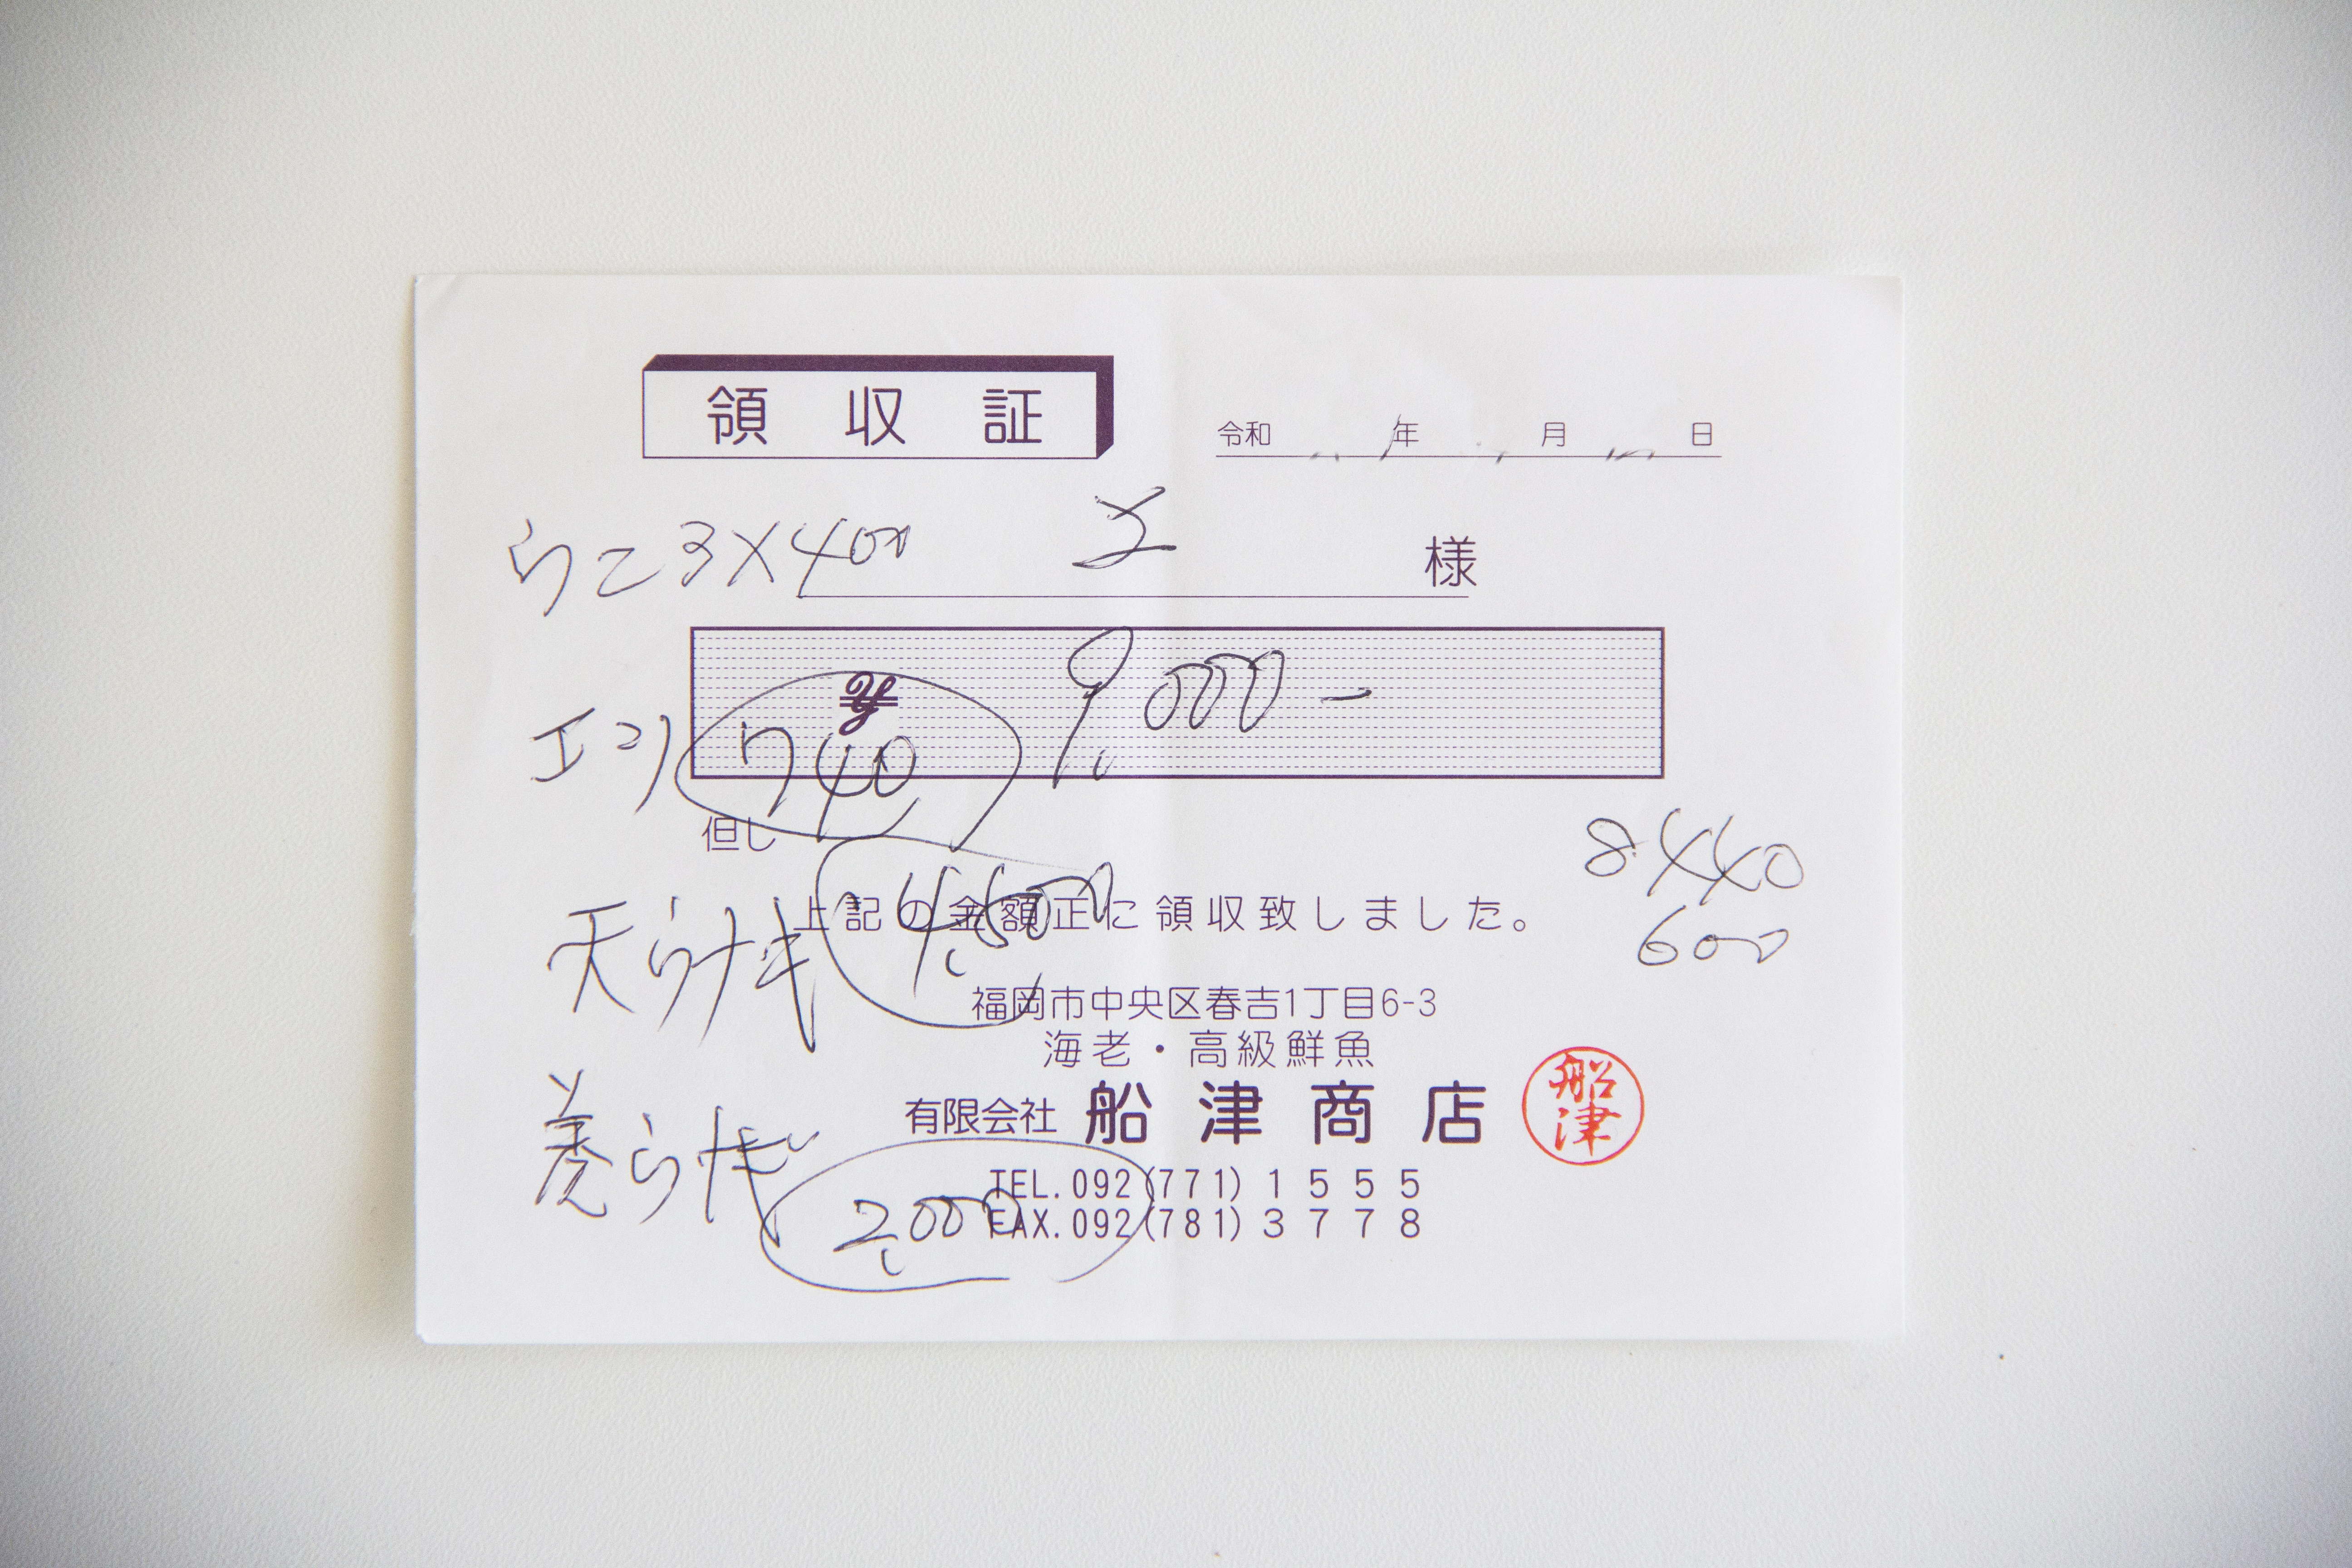 A receipt showing the much higher price of wild eel vs farmed eel.